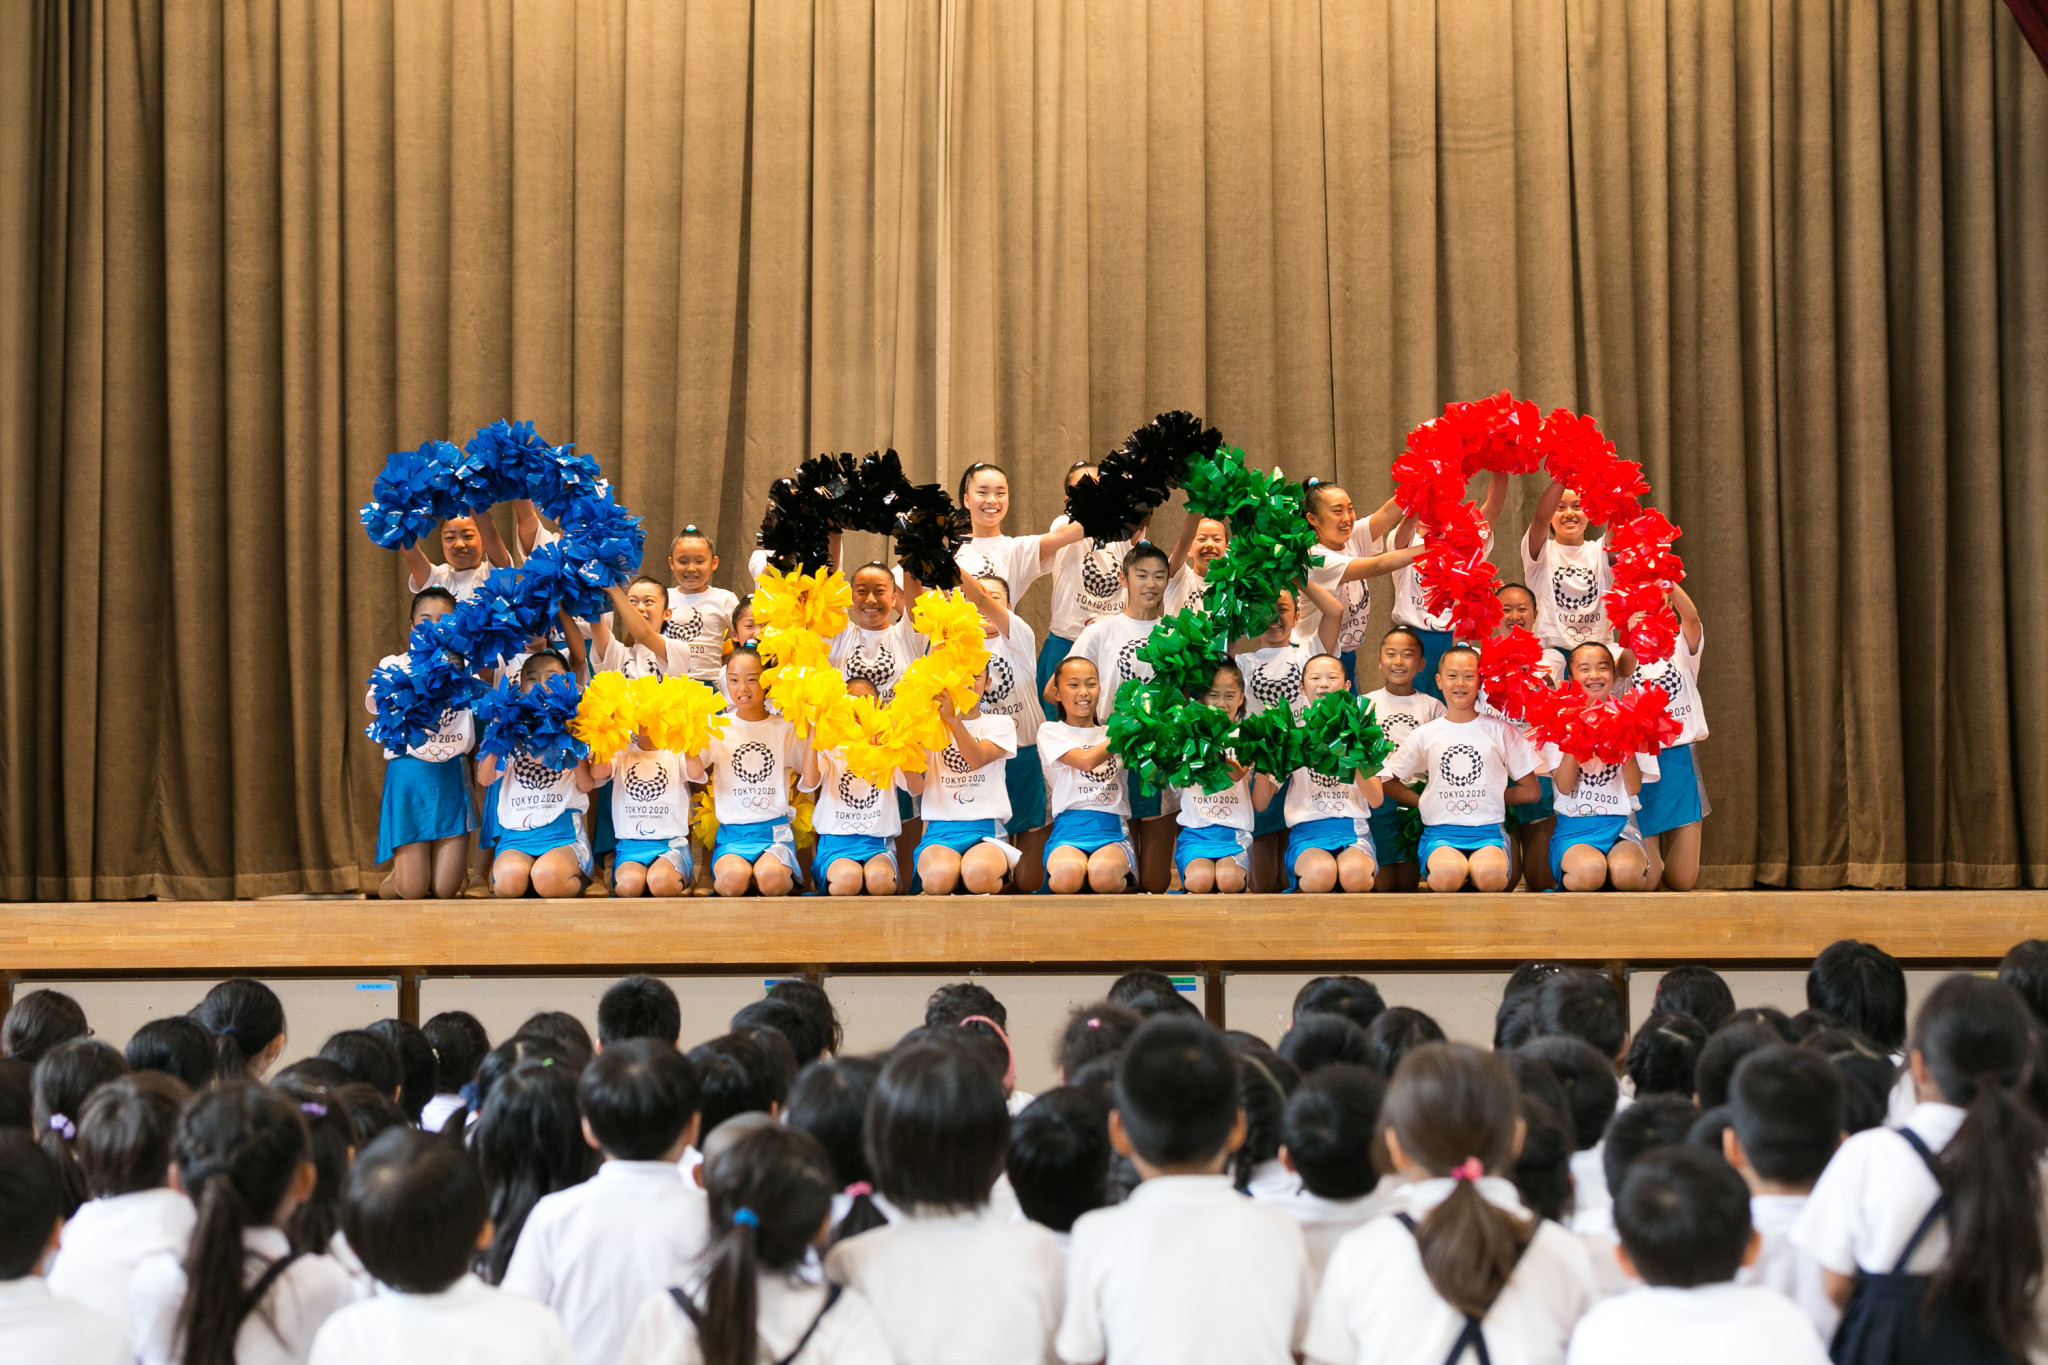 Tokyo 2020 to unveil shortlisted mascot designs on December 7